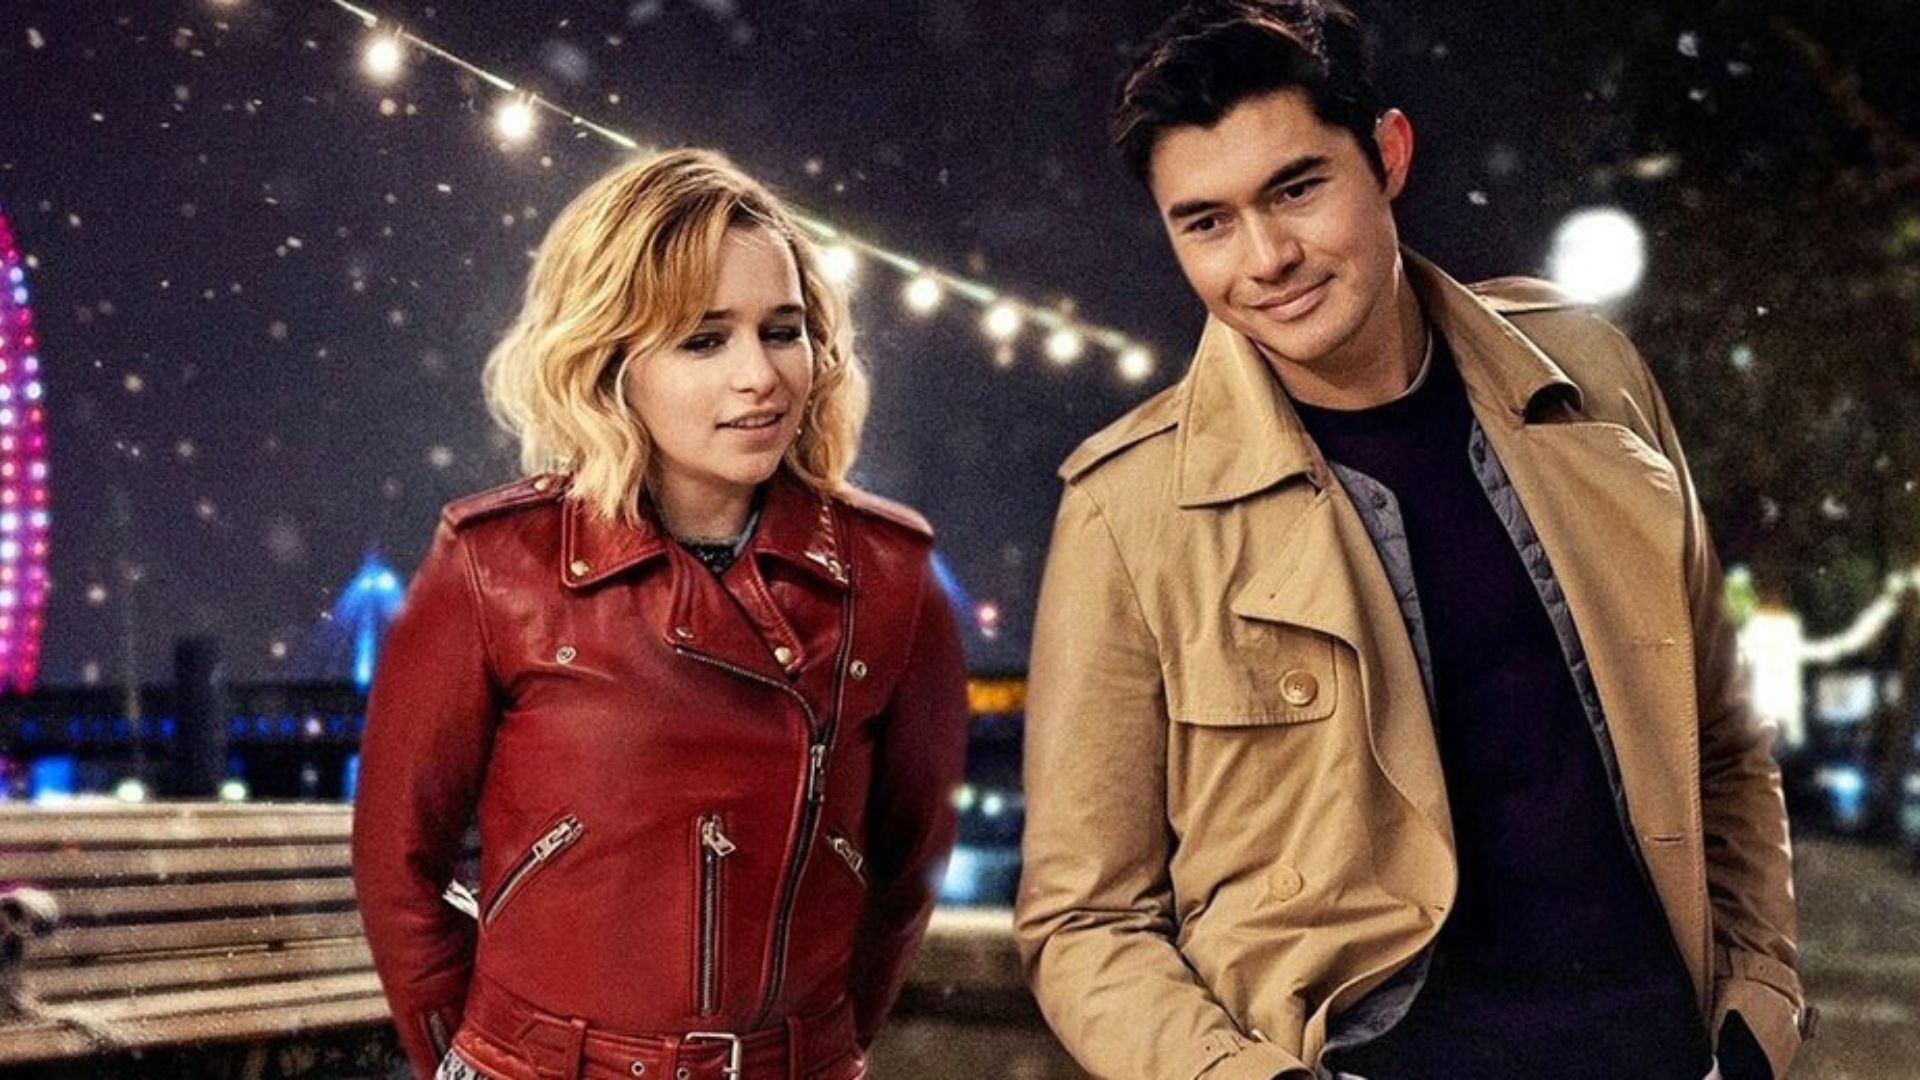 Emilia Clarke & Henry Golding Are Ready to Deck the Halls with Love in for Last Christmas